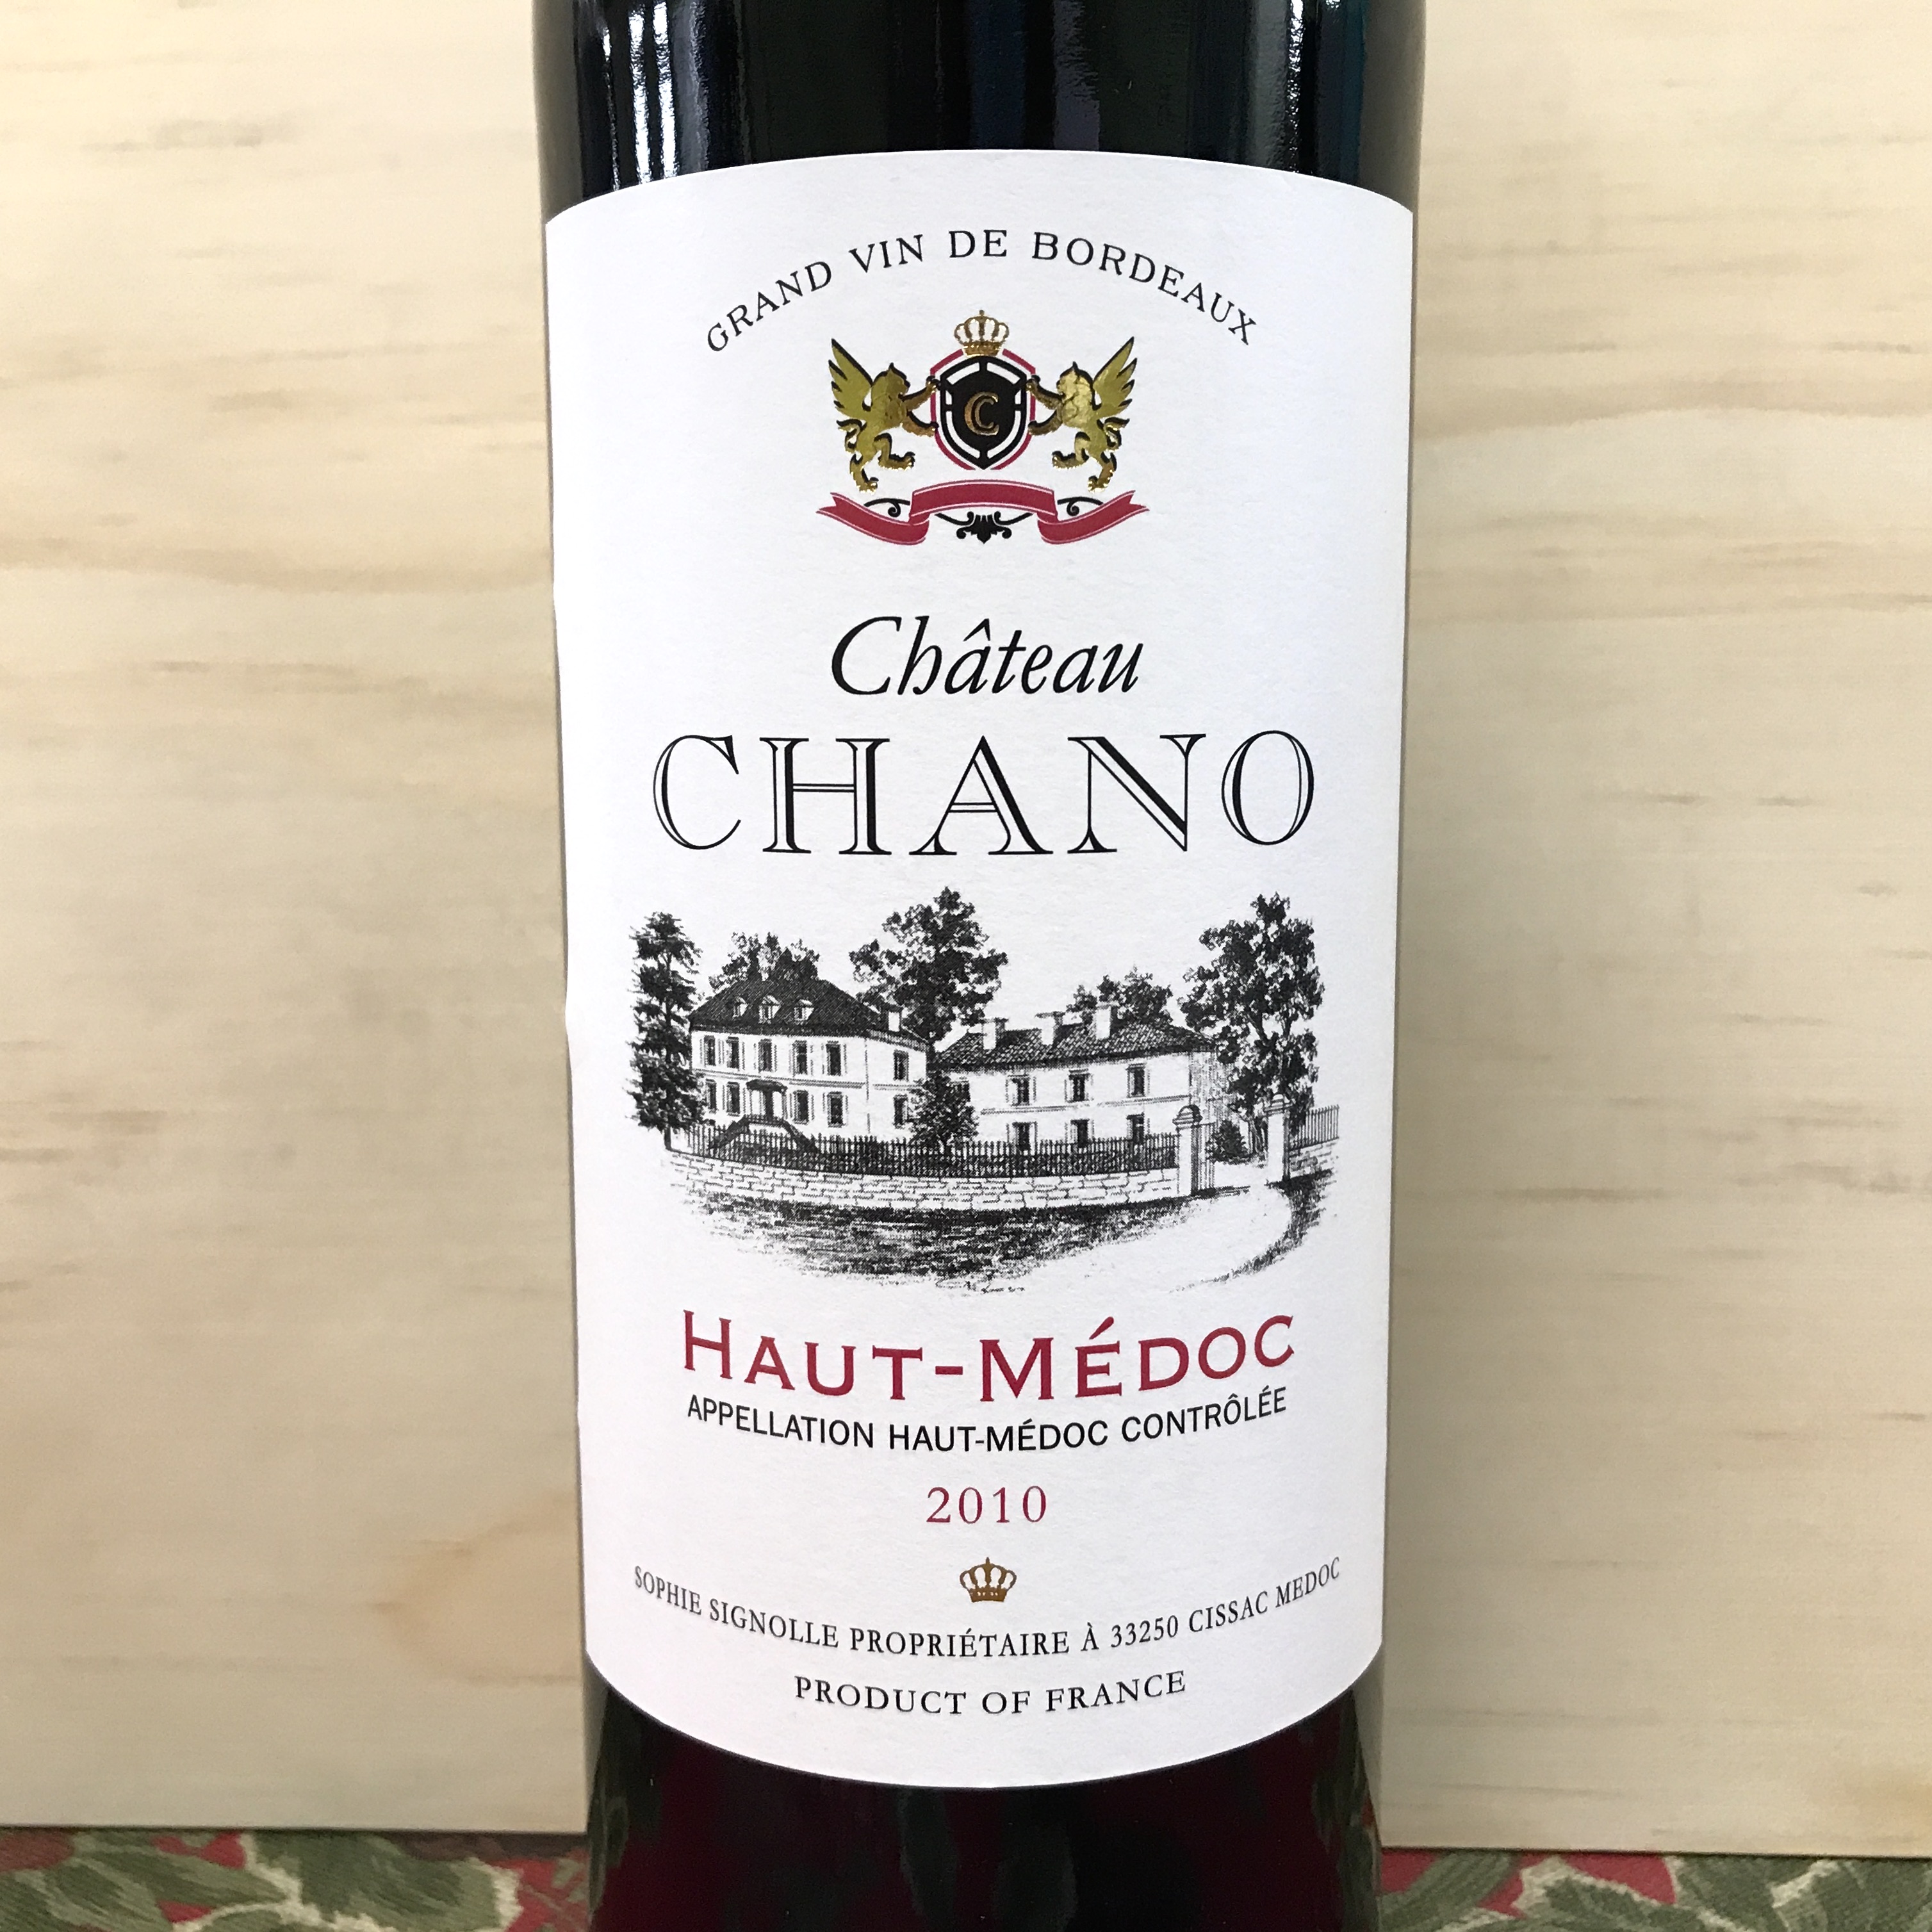 Chateau Chano Haut-Medoc red 2010